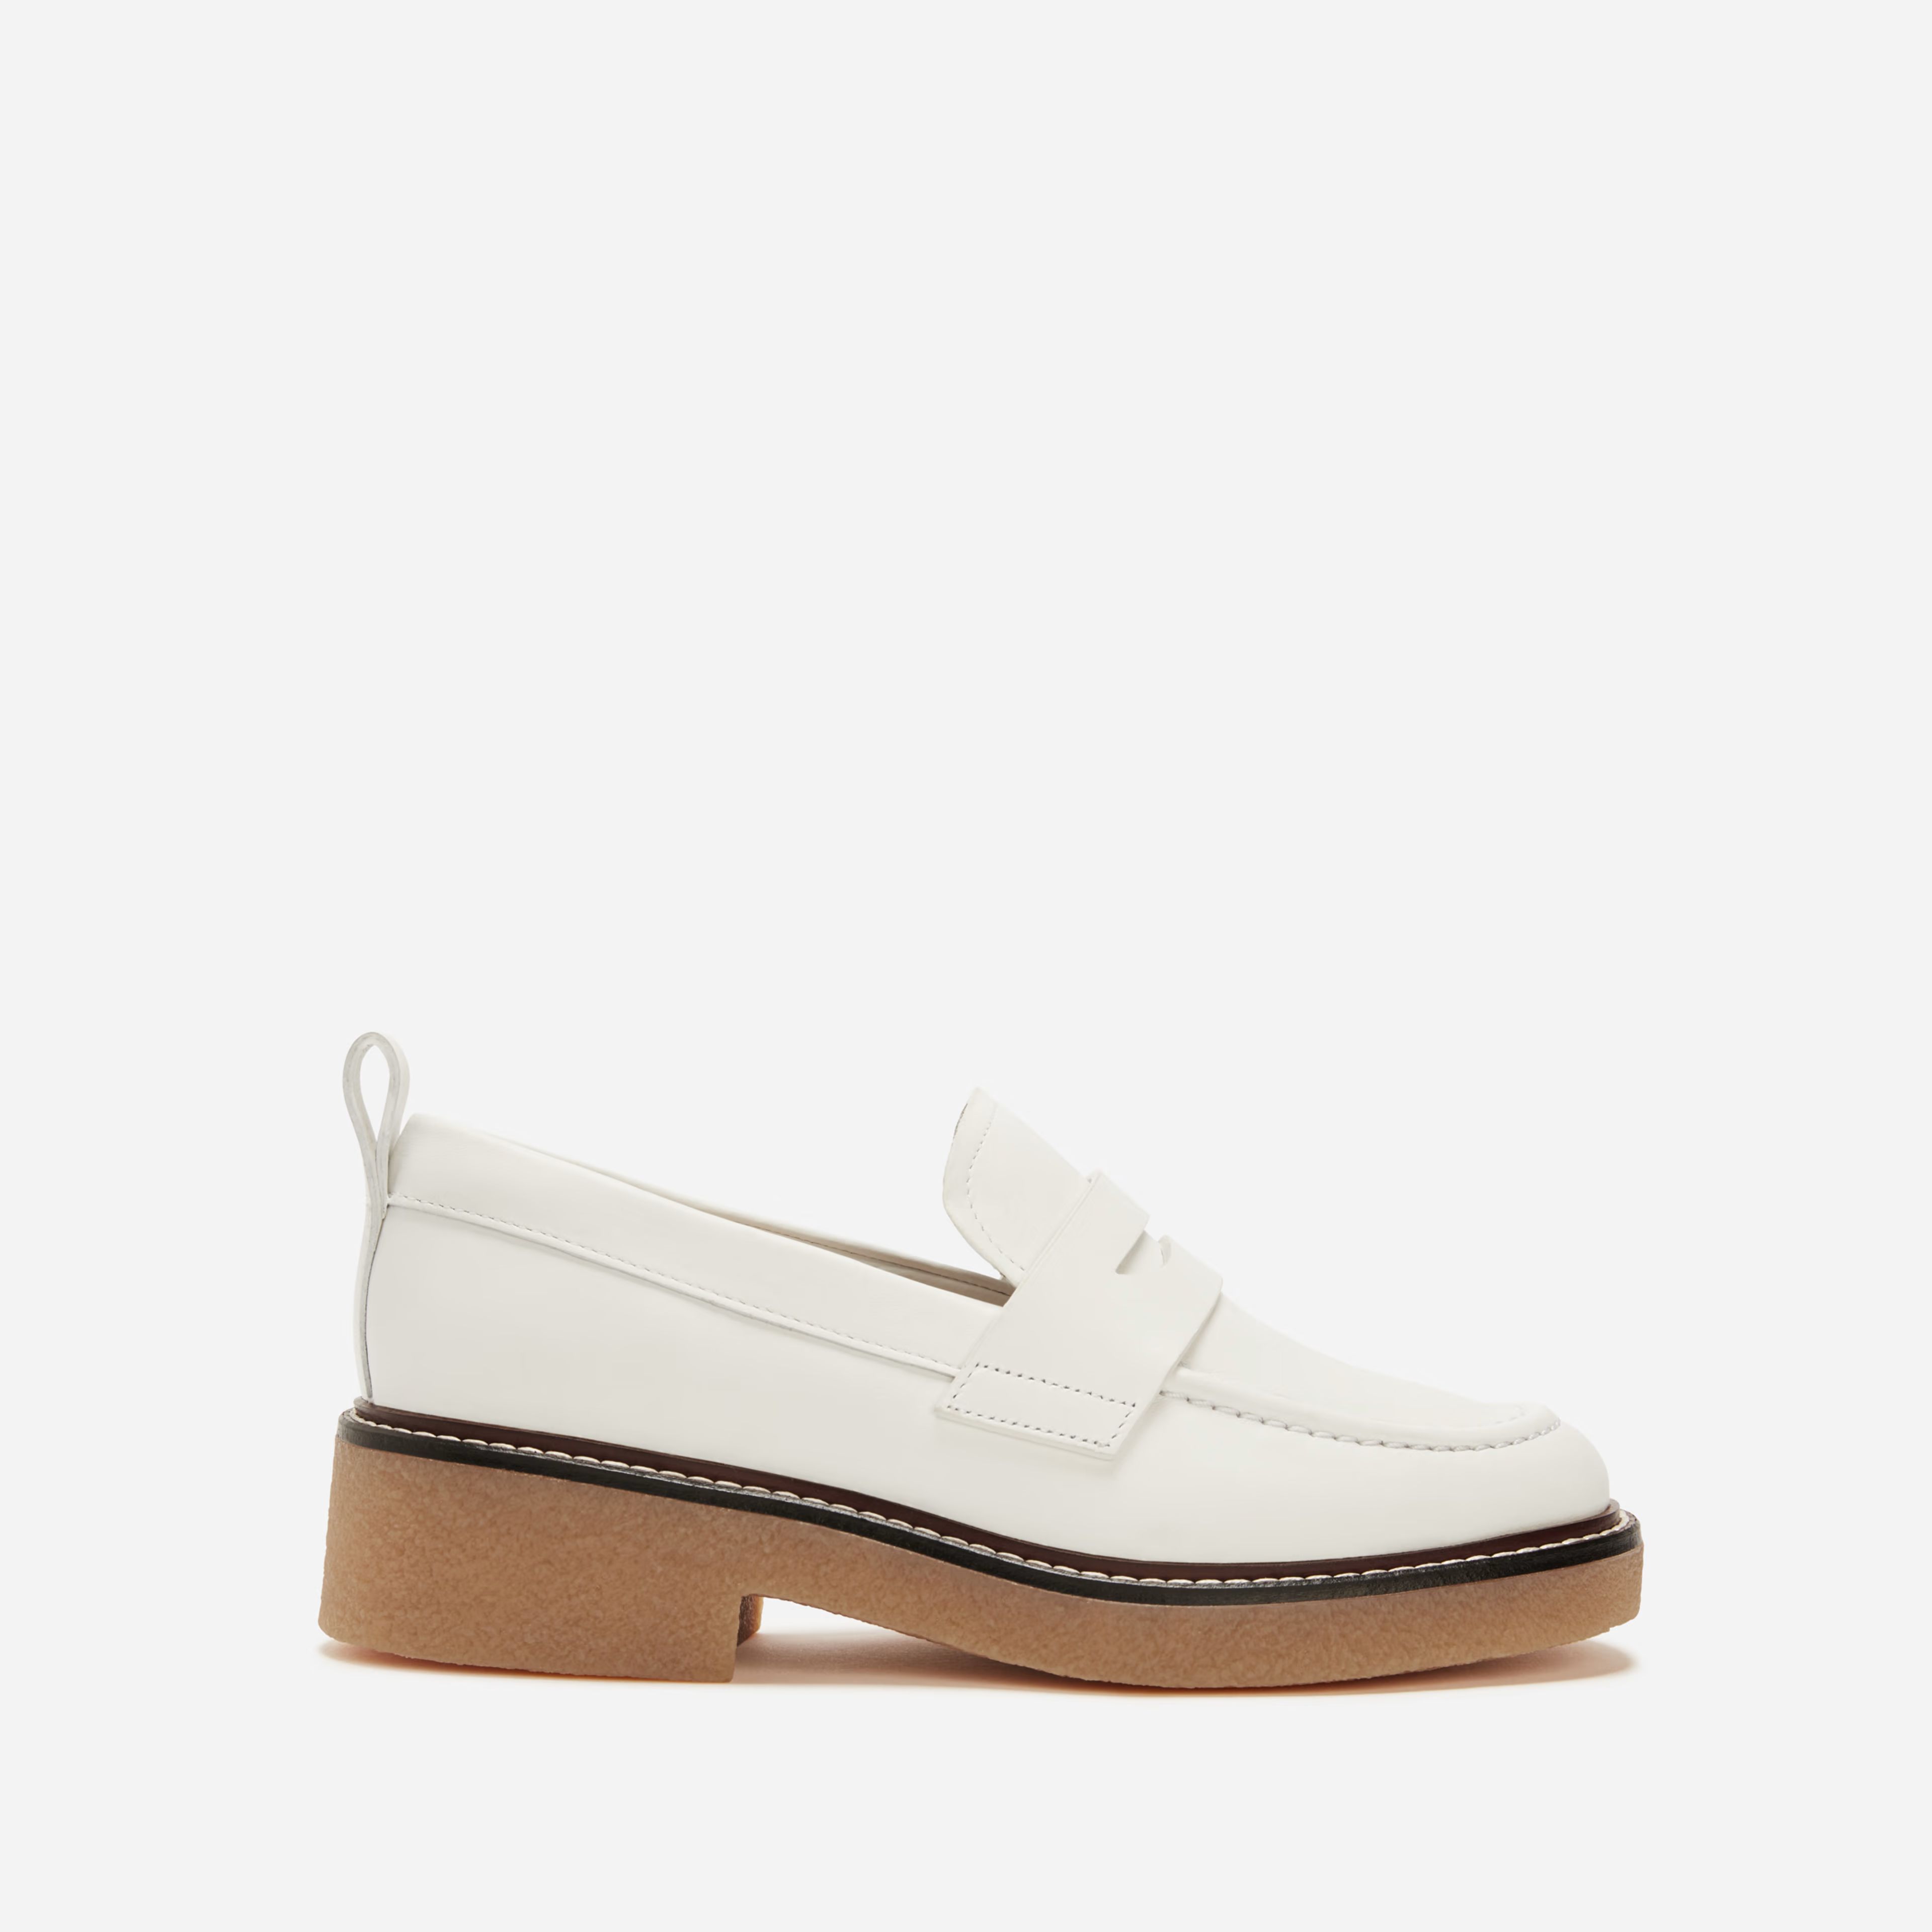 The Gum Sole Penny Loafer | Everlane